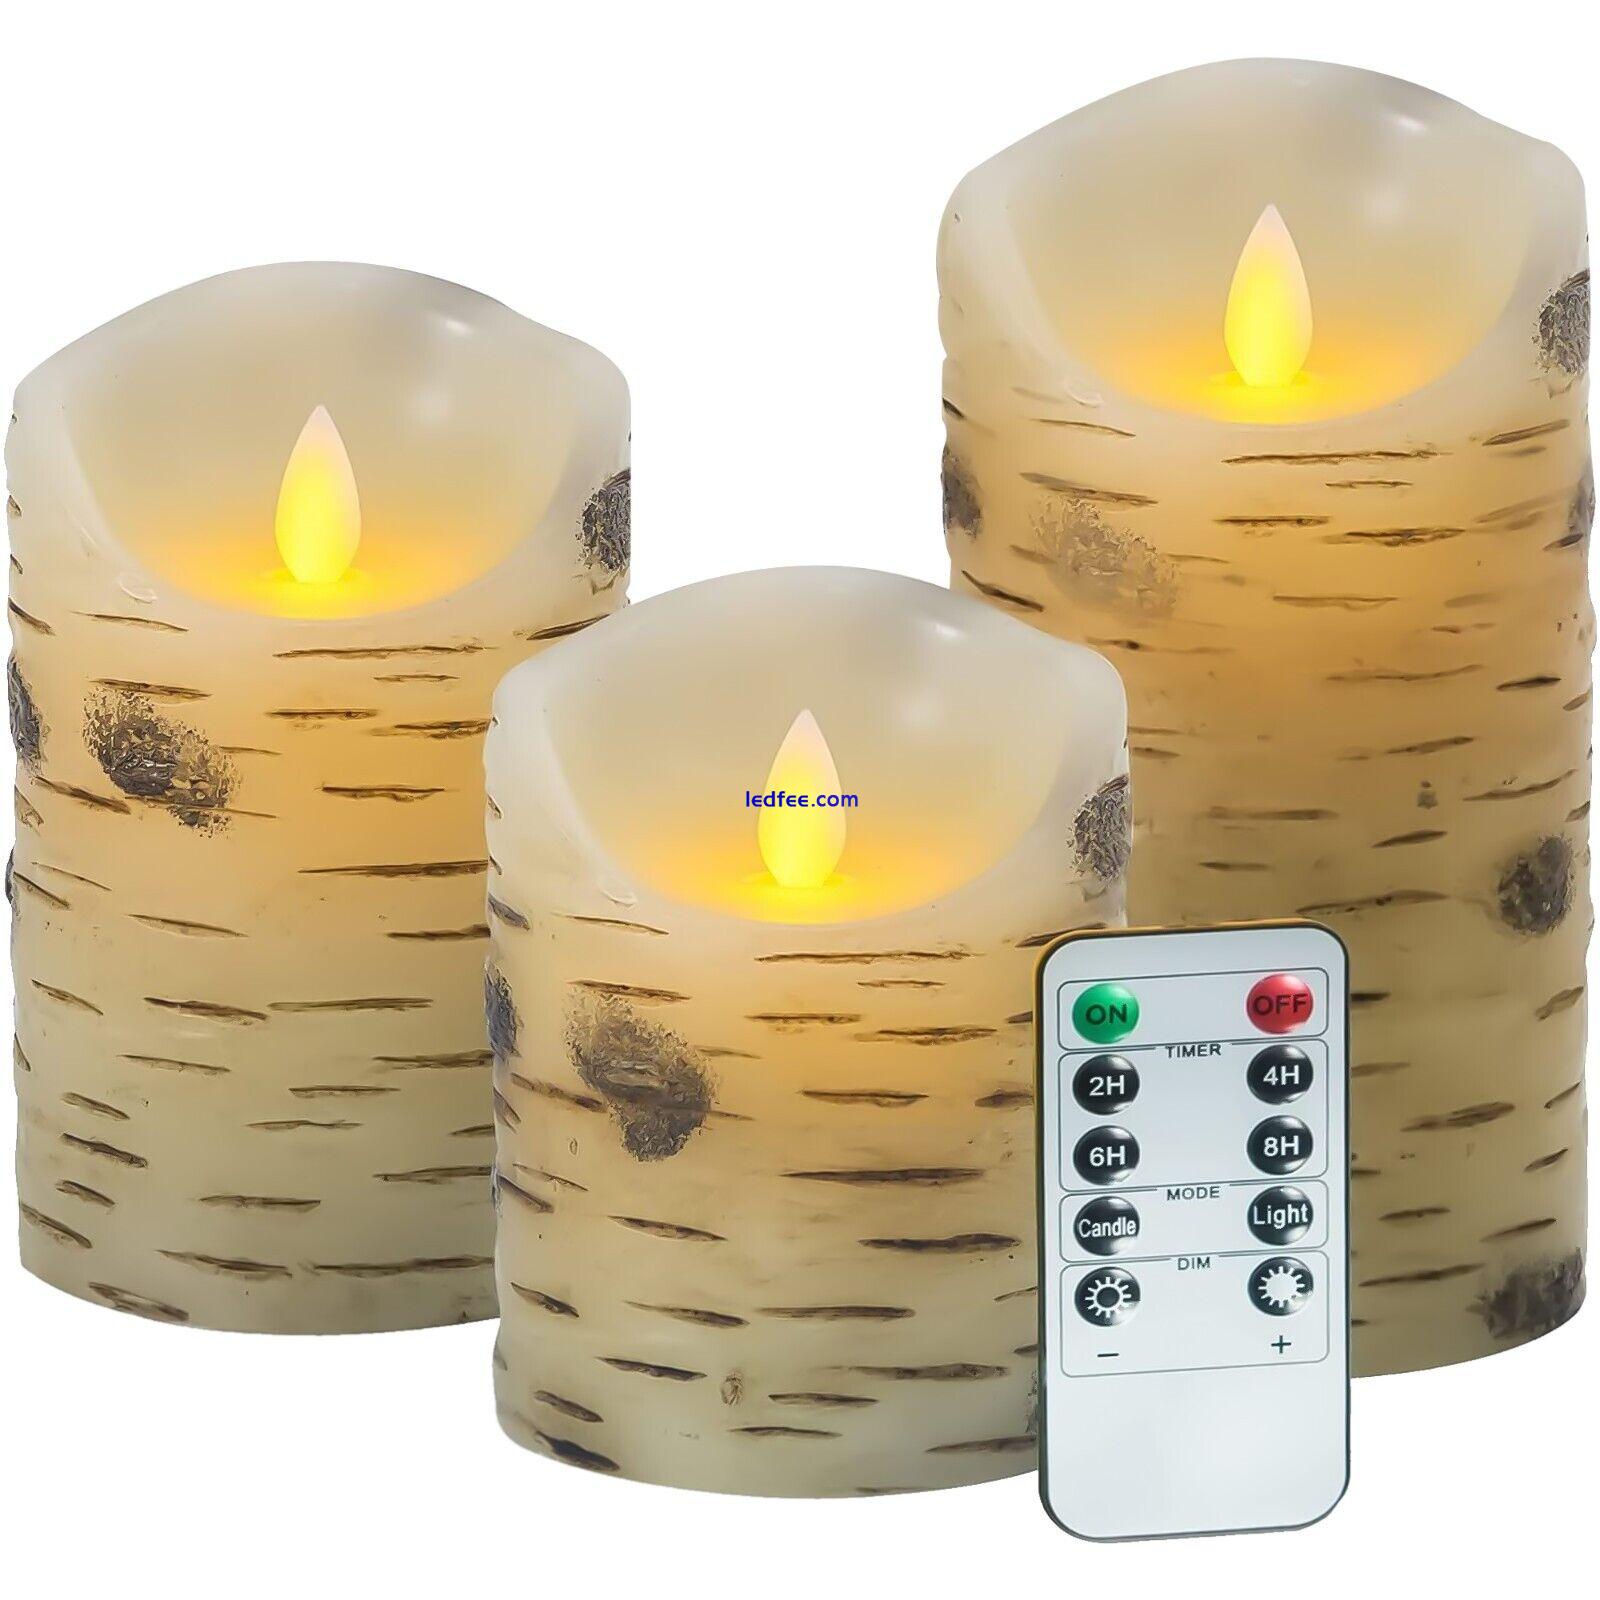 3 Set Flickering LED Candles Real Wax Battery Powered Lights Remote Control Lamp 3 